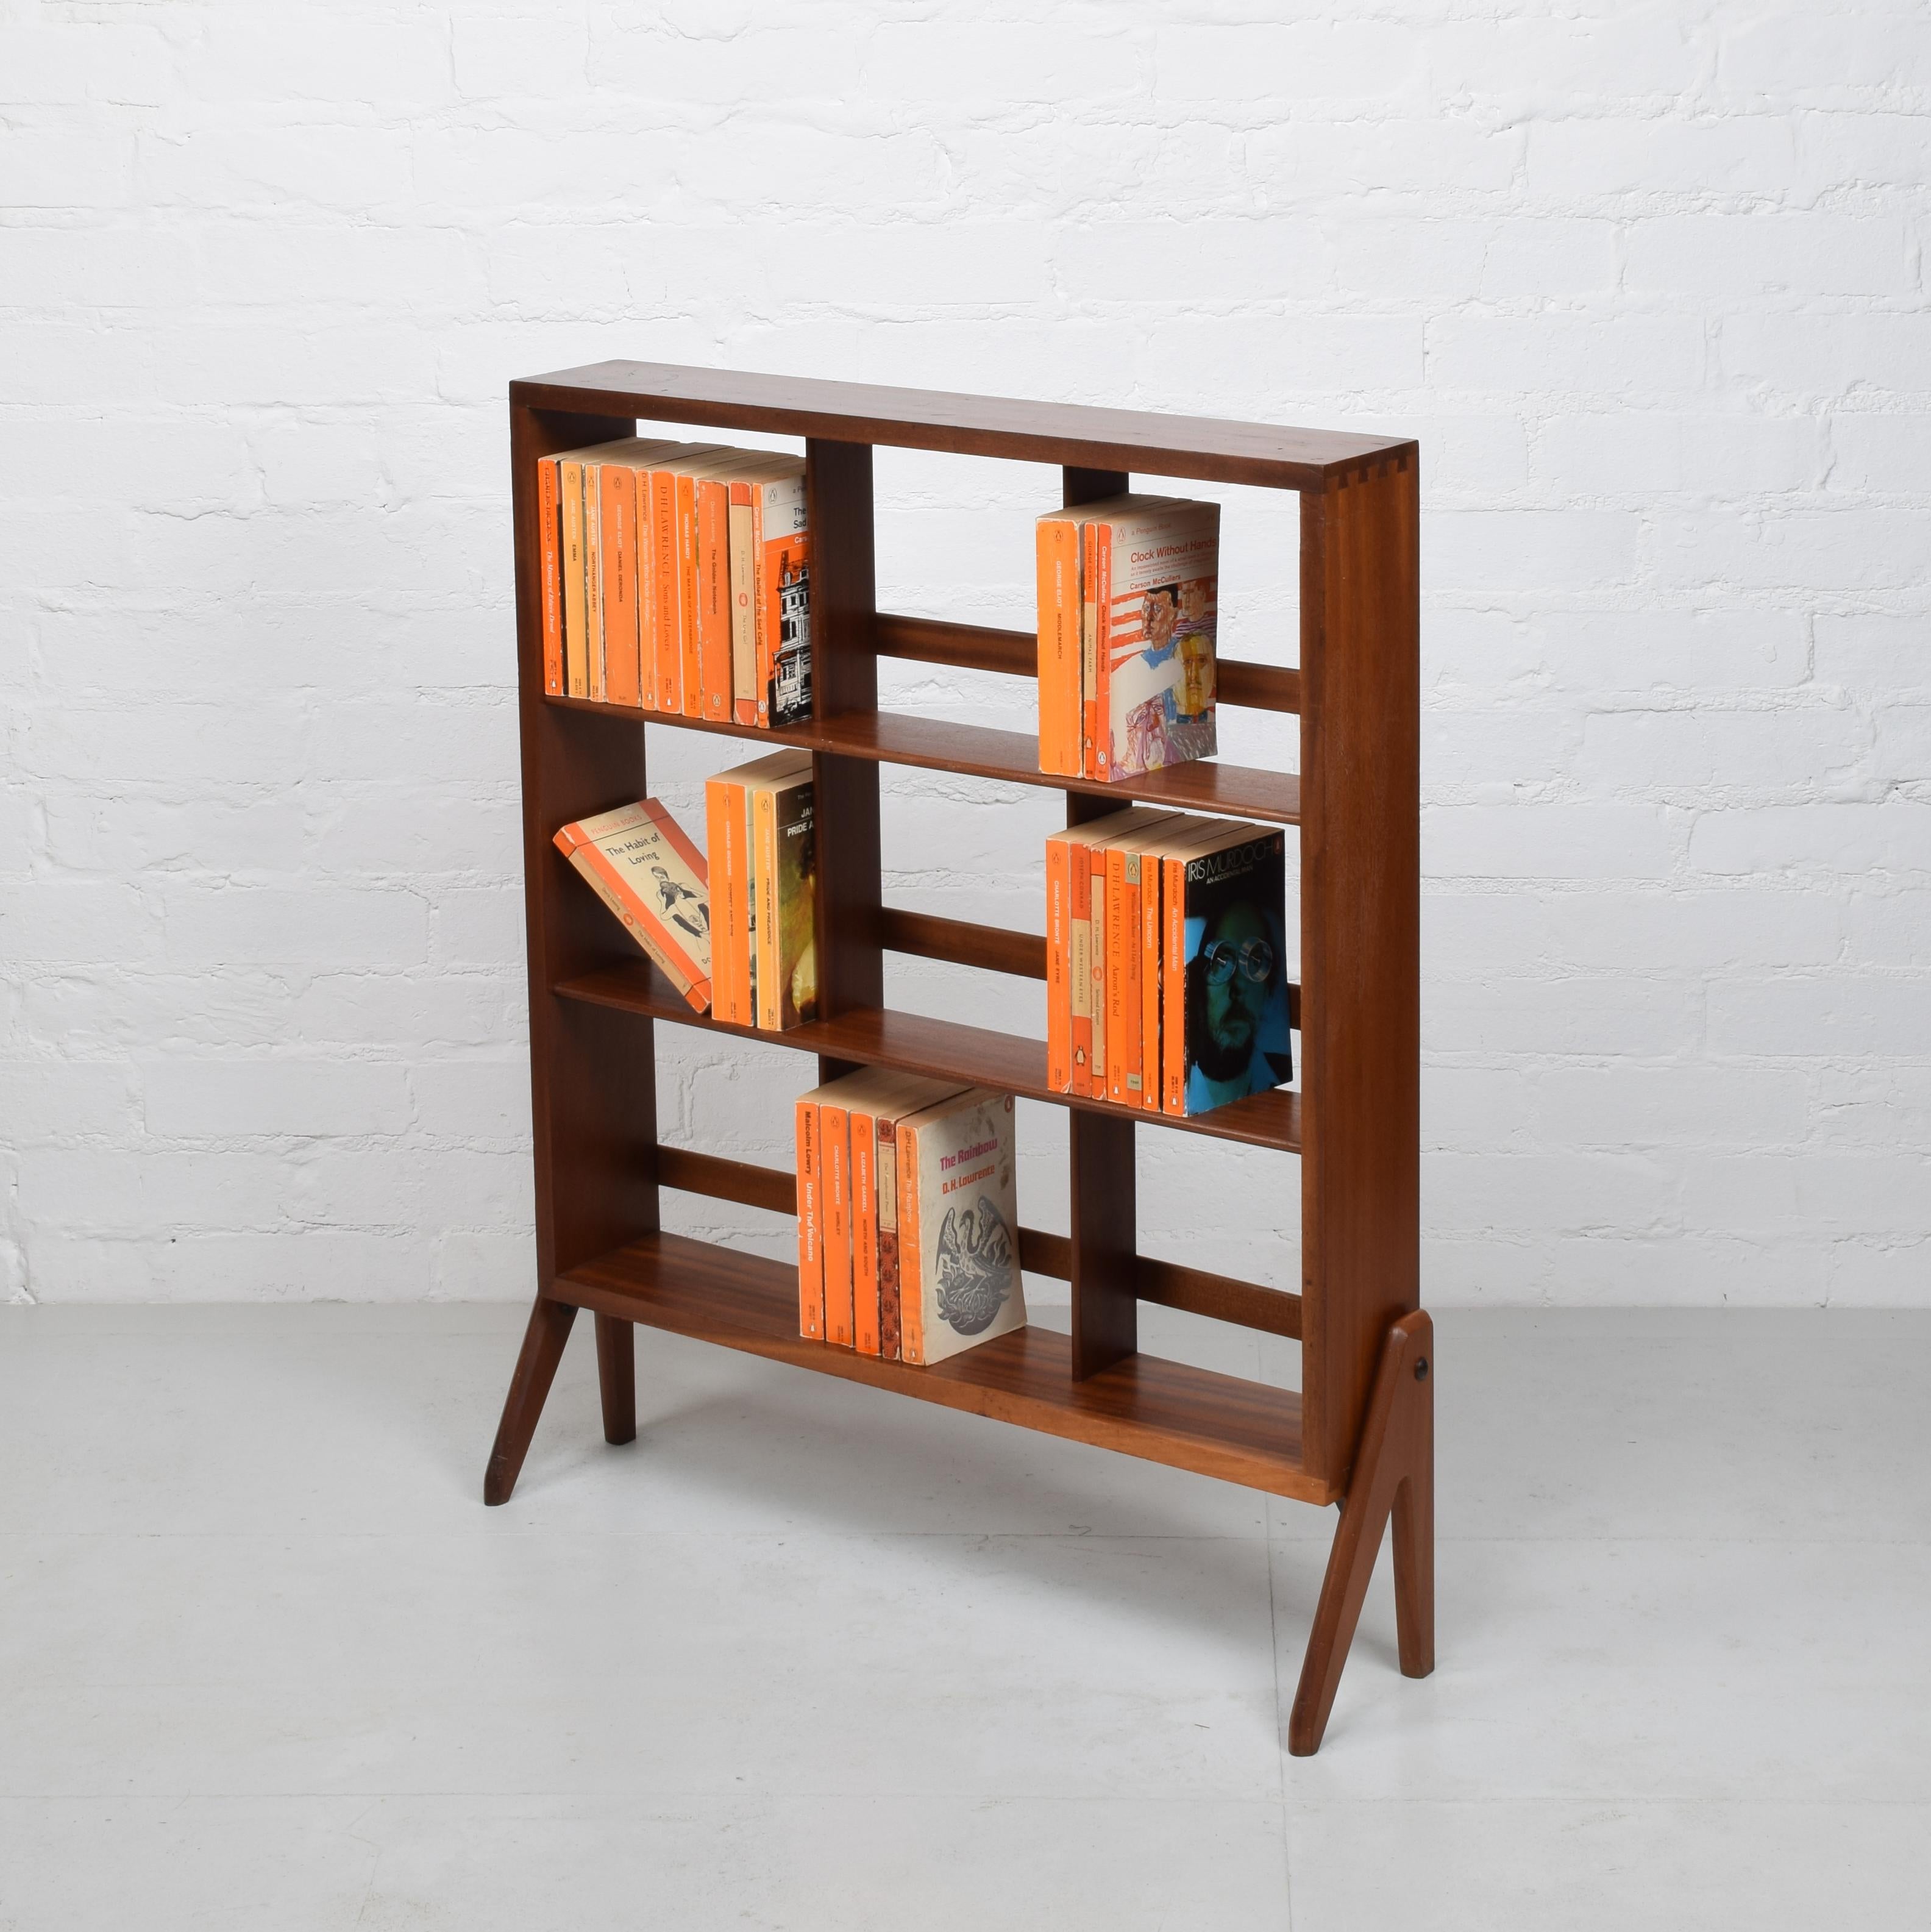 Beaver and Tapley (manufacturer), in collaboration with Penguin Books, 1956
'Penguin Bookshelf'

Classic 1950's shelf unit, designed and marketed in close collaboration with Penguin Books… and dimensioned to fit the books perfectly.

Very much